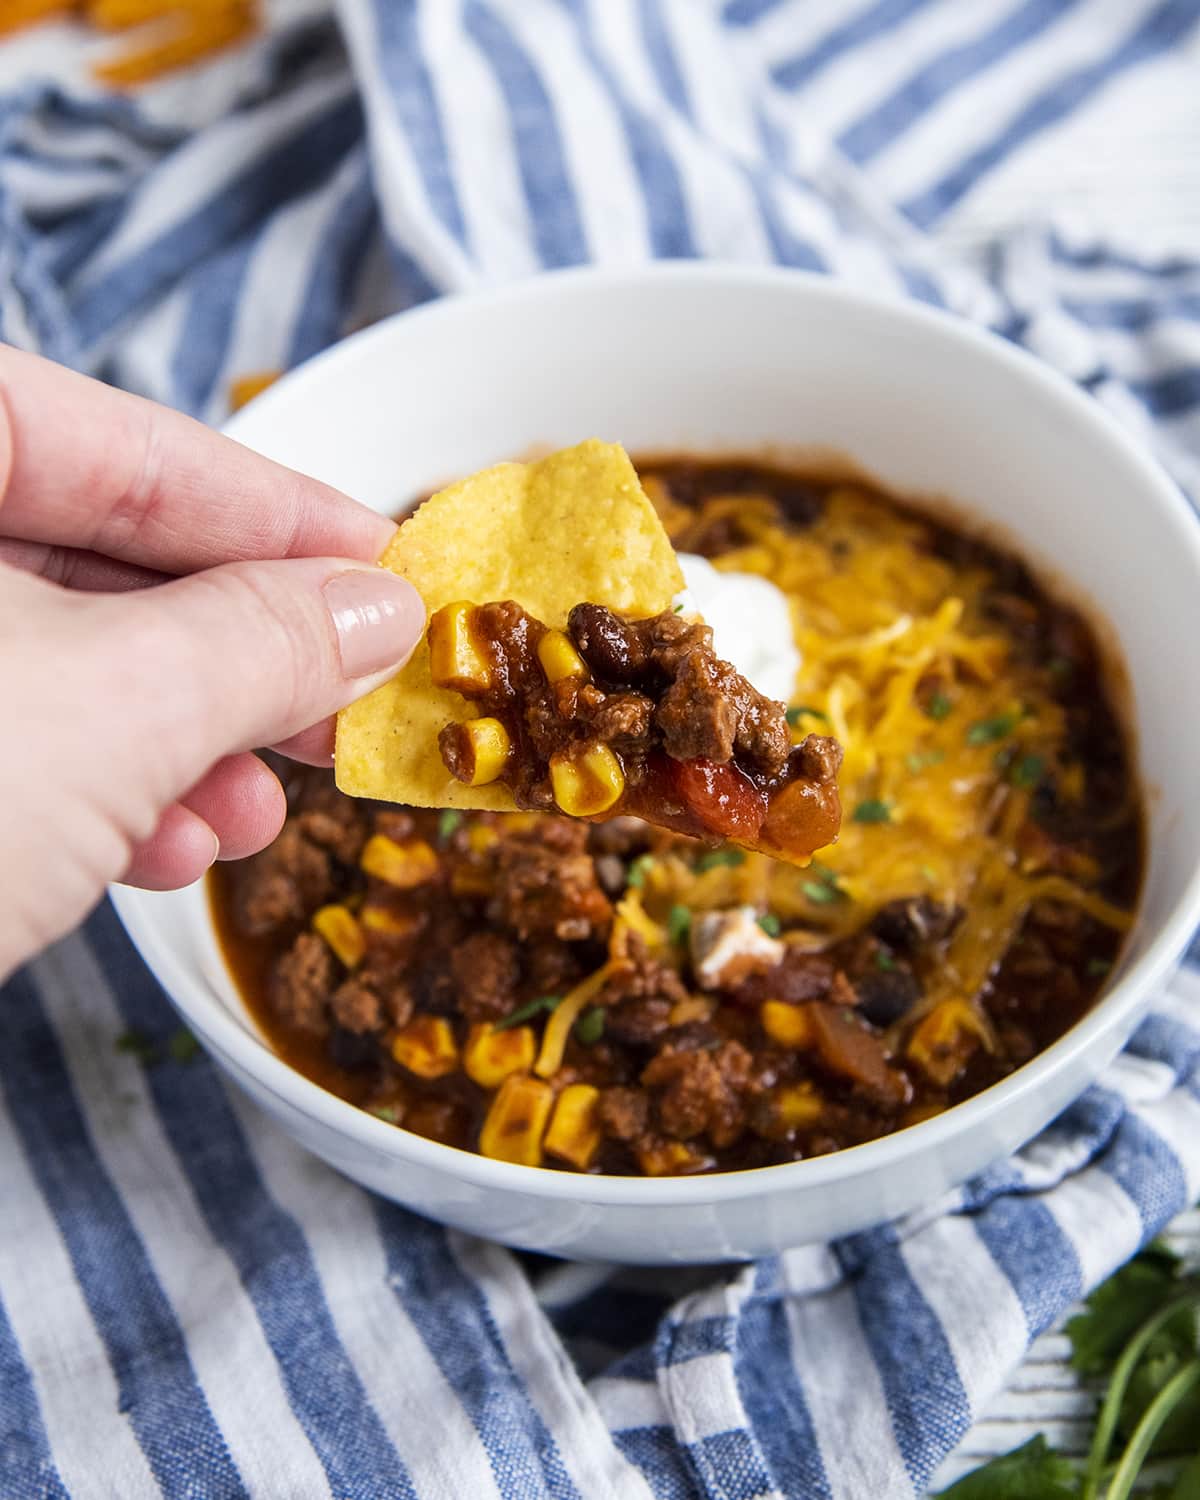 A hand holding a tortilla chip with taco soup on it.